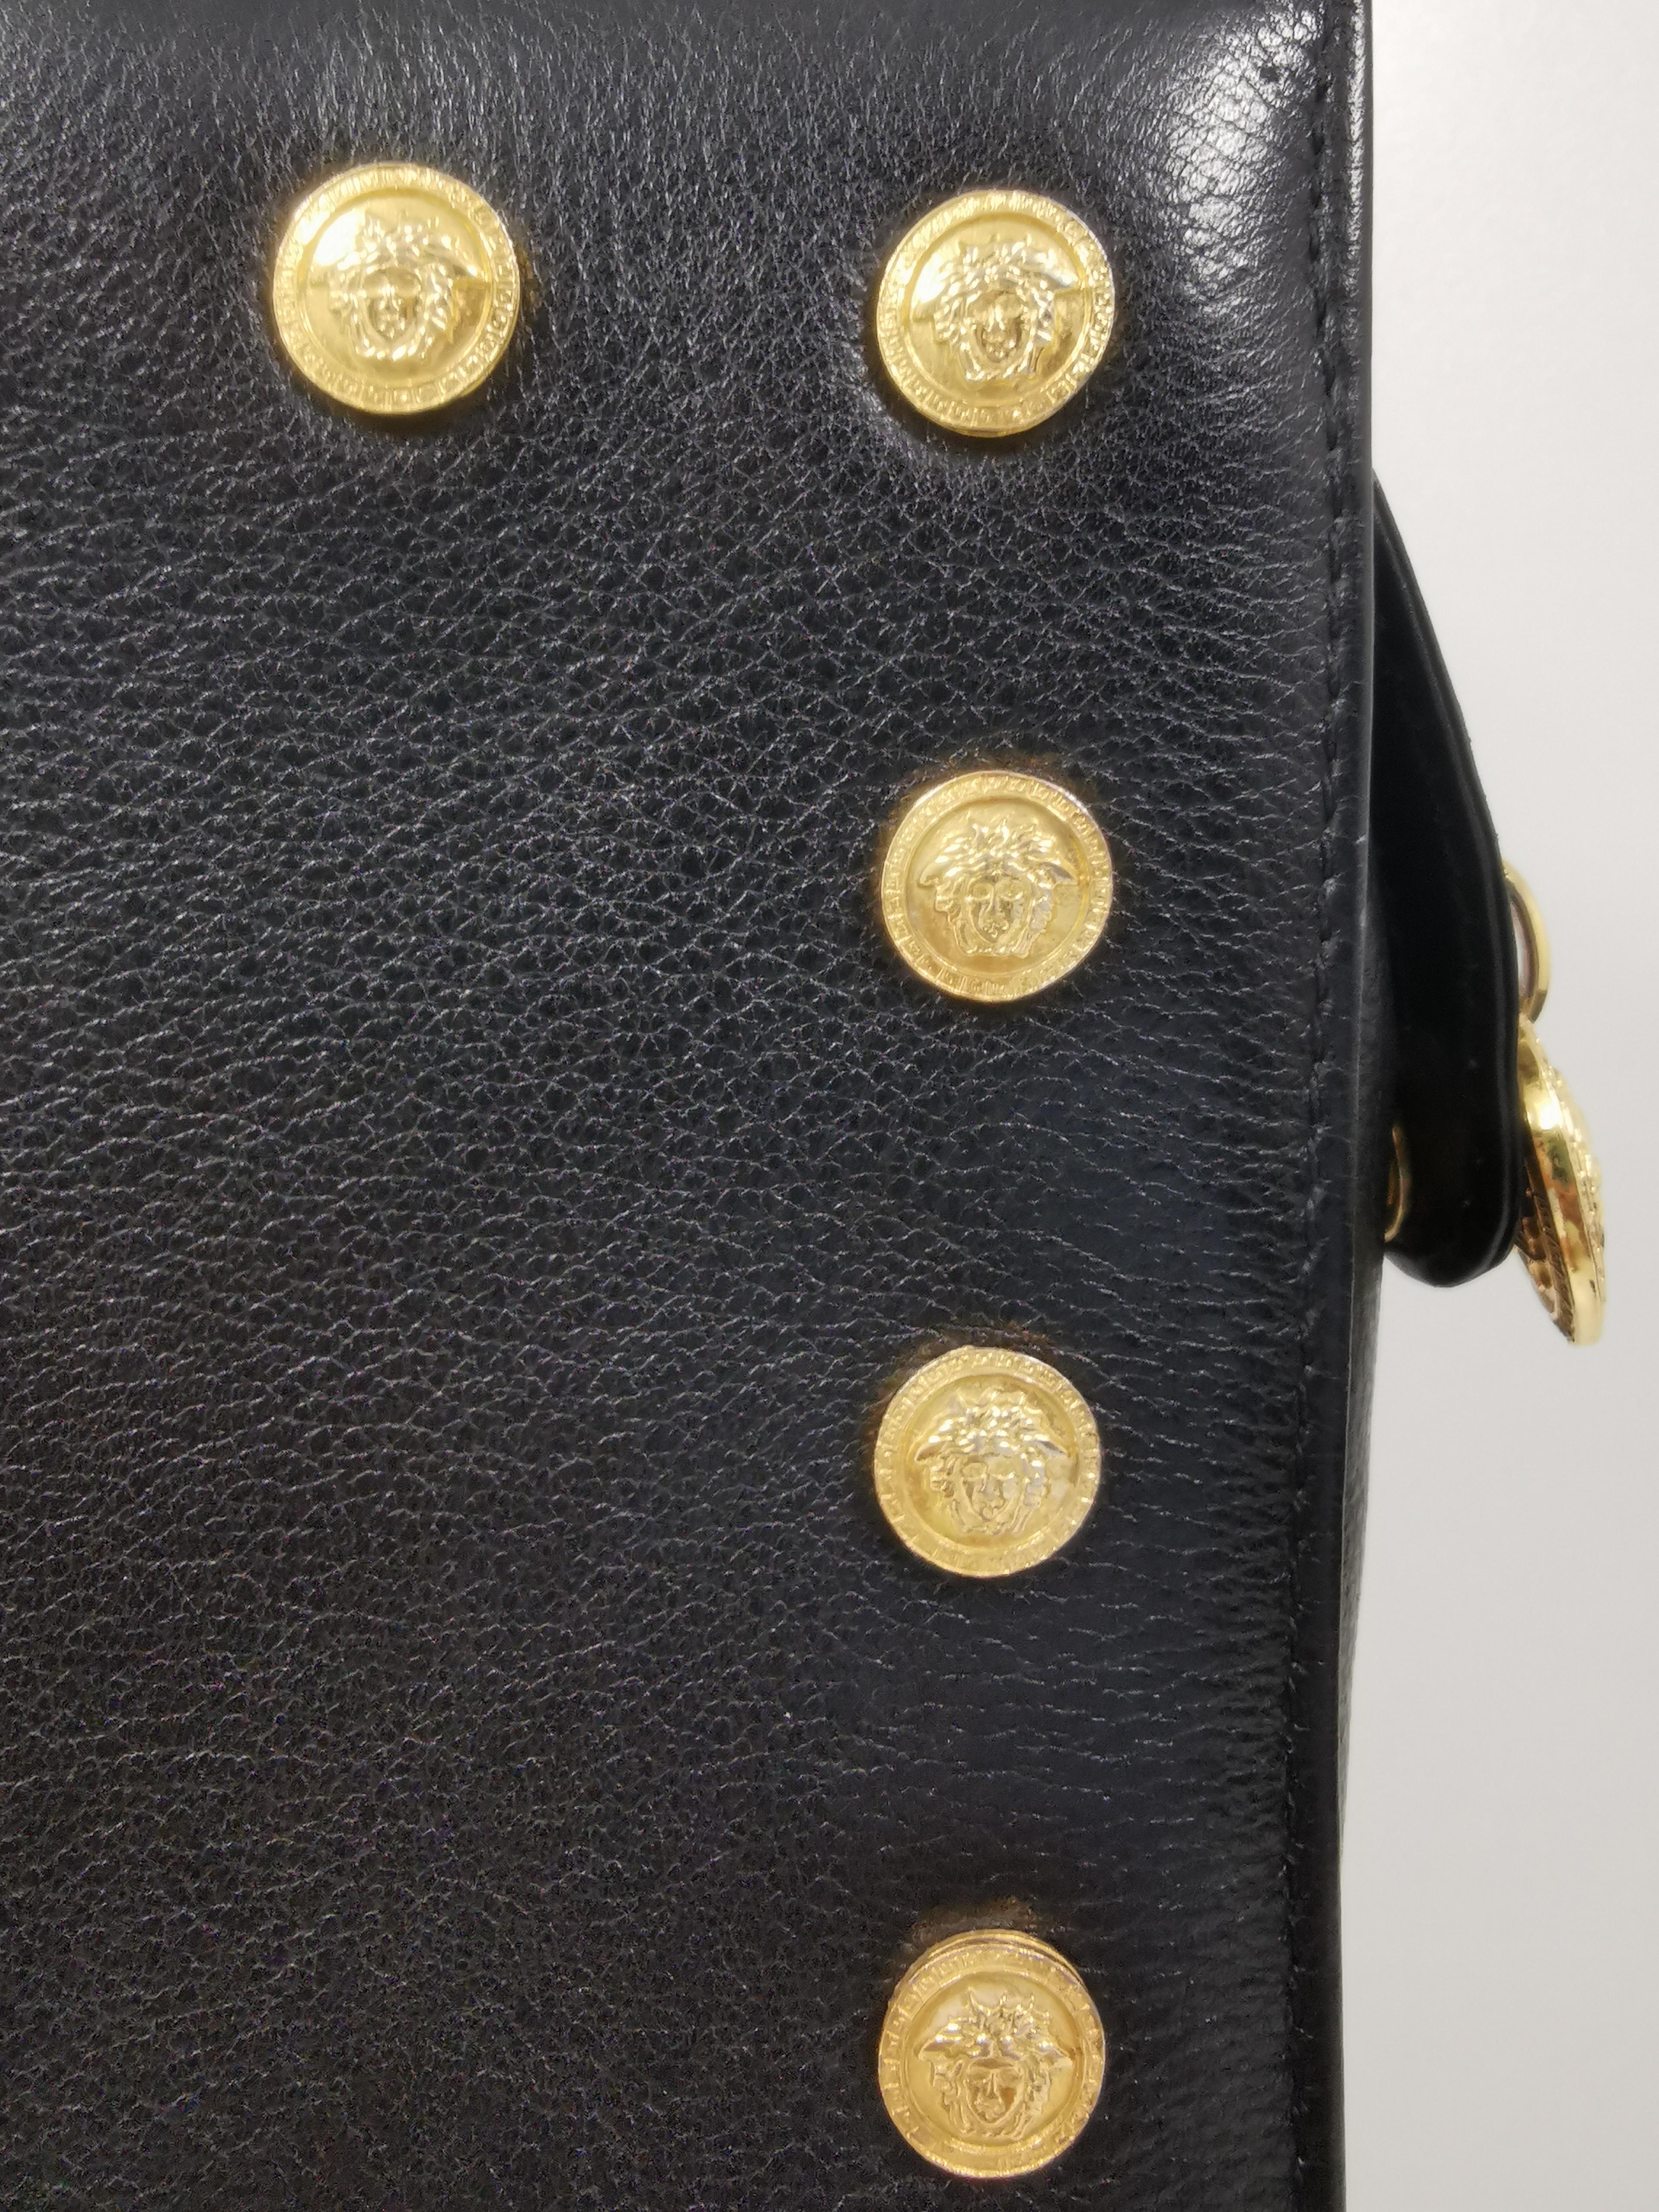 1990's Gianni Versace Signature Medusa Head Gold Medallion Shoulder Bag In Good Condition For Sale In PUTNEY, NSW